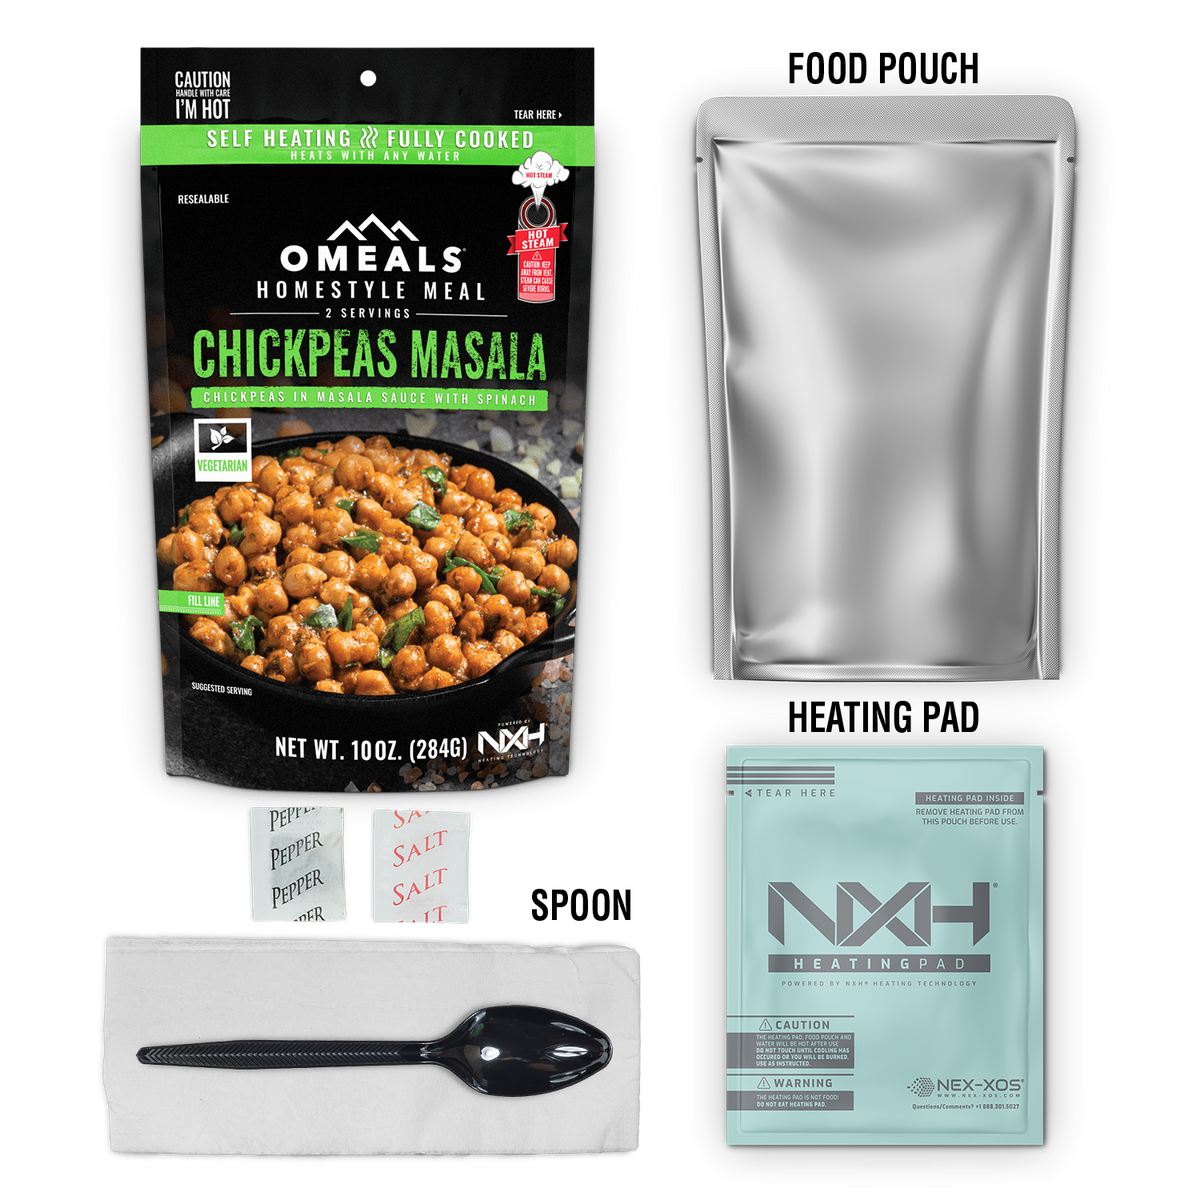 OMEALS® Chickpea Masala